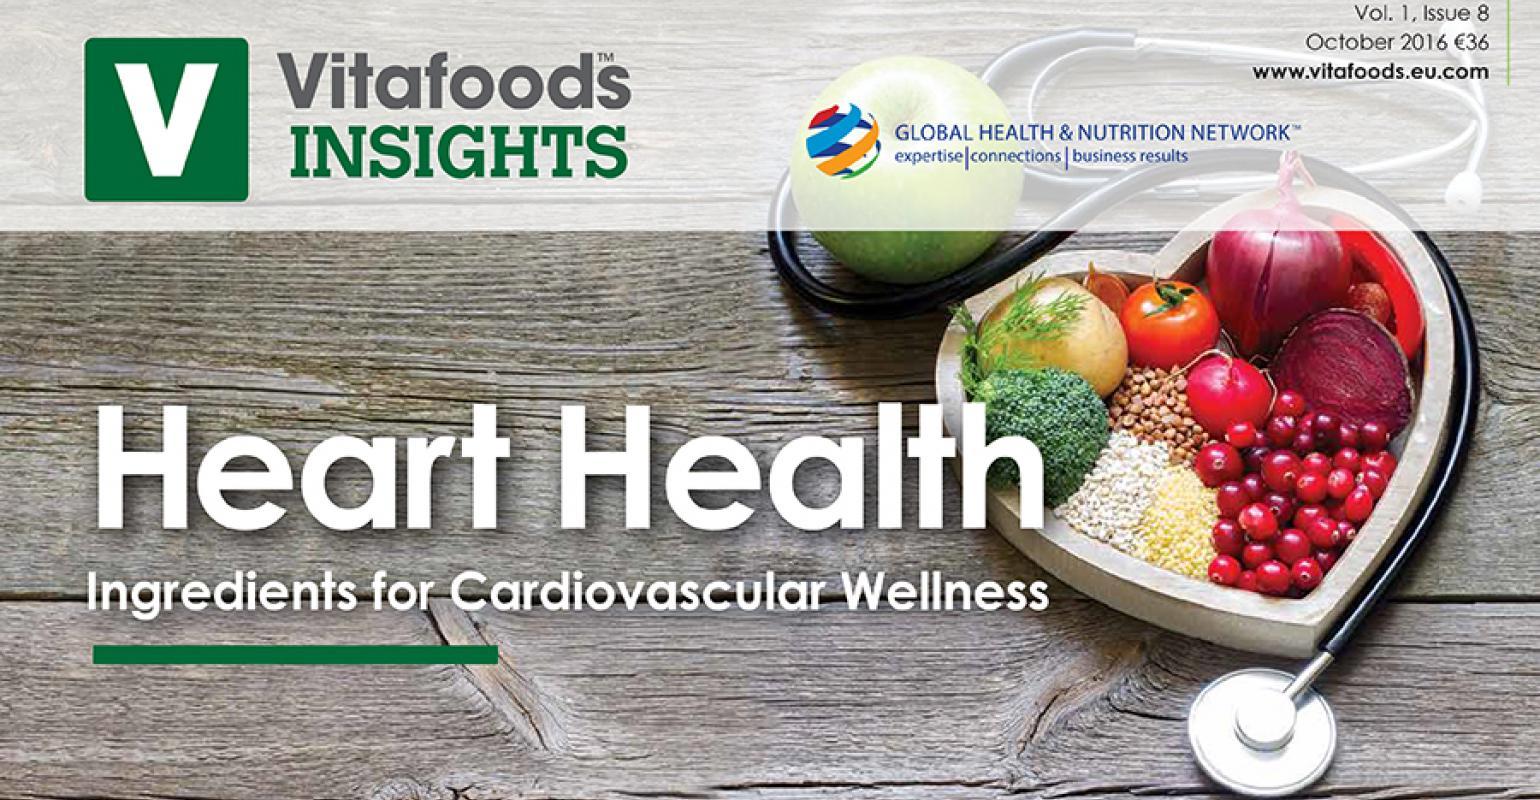 Heart Health and Wellness Logo - Heart Health: Ingredients for Cardiovascular Wellness. Natural